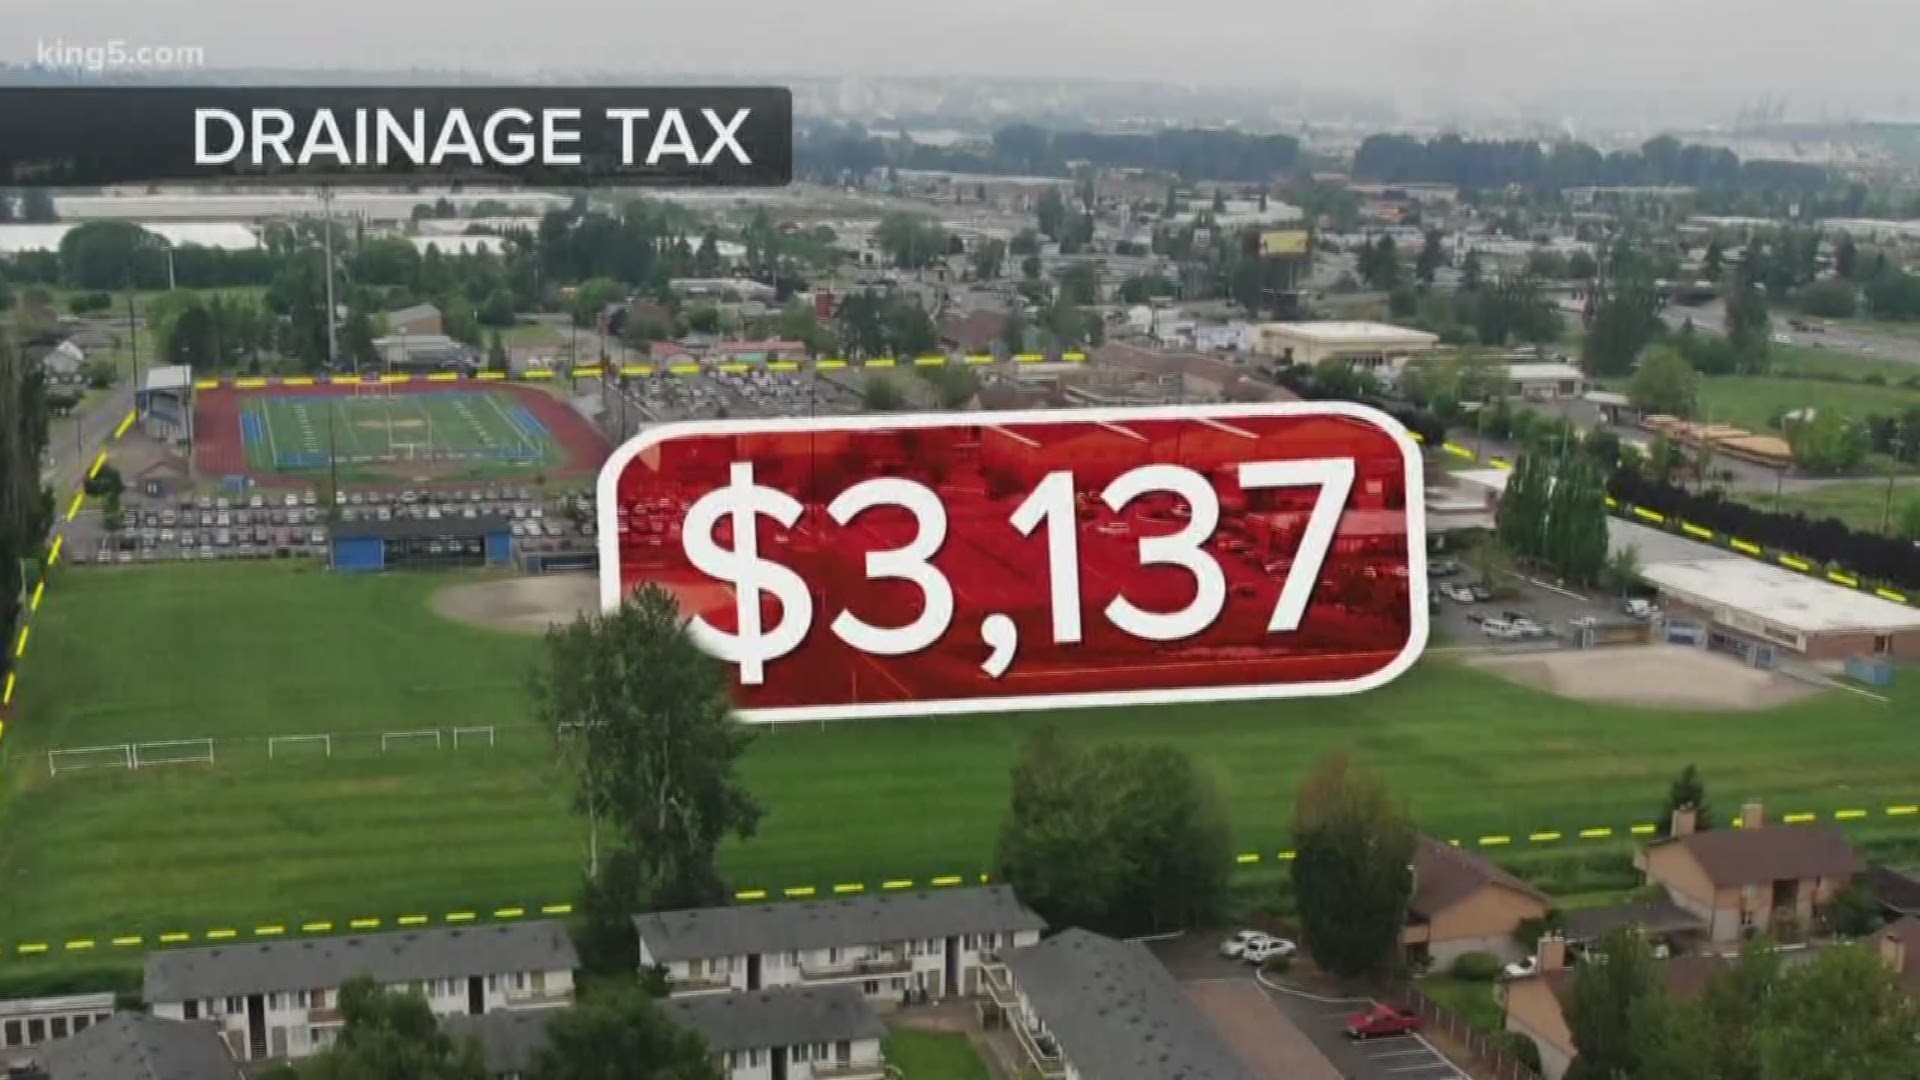 Pierce County drainage district No. 23, which has not been audited since 2003, has $1.3 million in tax money sitting in a county fund. KING 5's Chris Ingalls investigates.